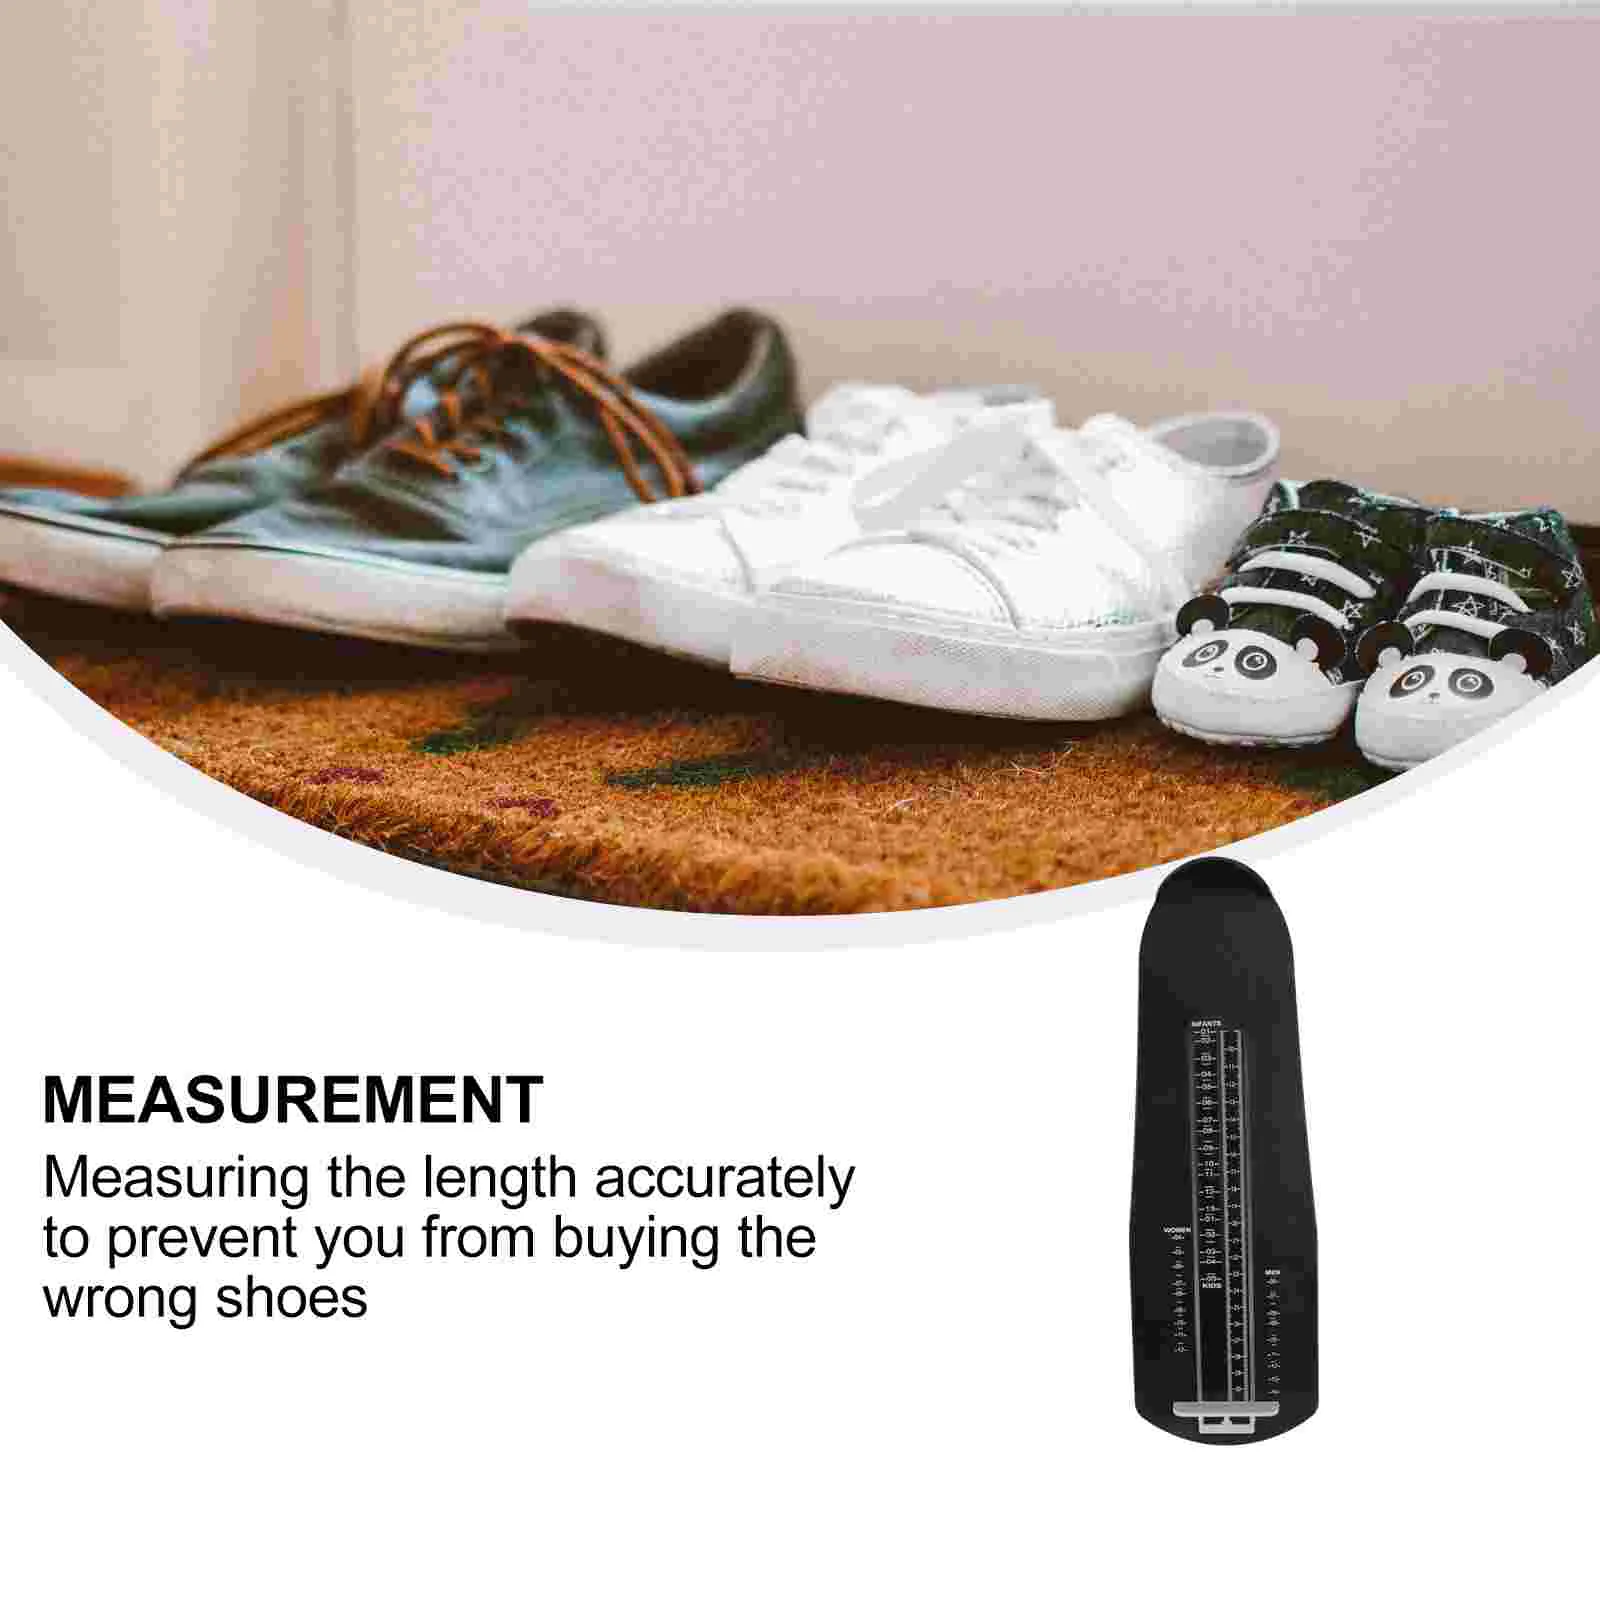 Foot Device Measuring Measure Size Adults Gauge Sizer Feet Ruler Shoes Home Adult Tool Kids Family Measurer Us  images - 6